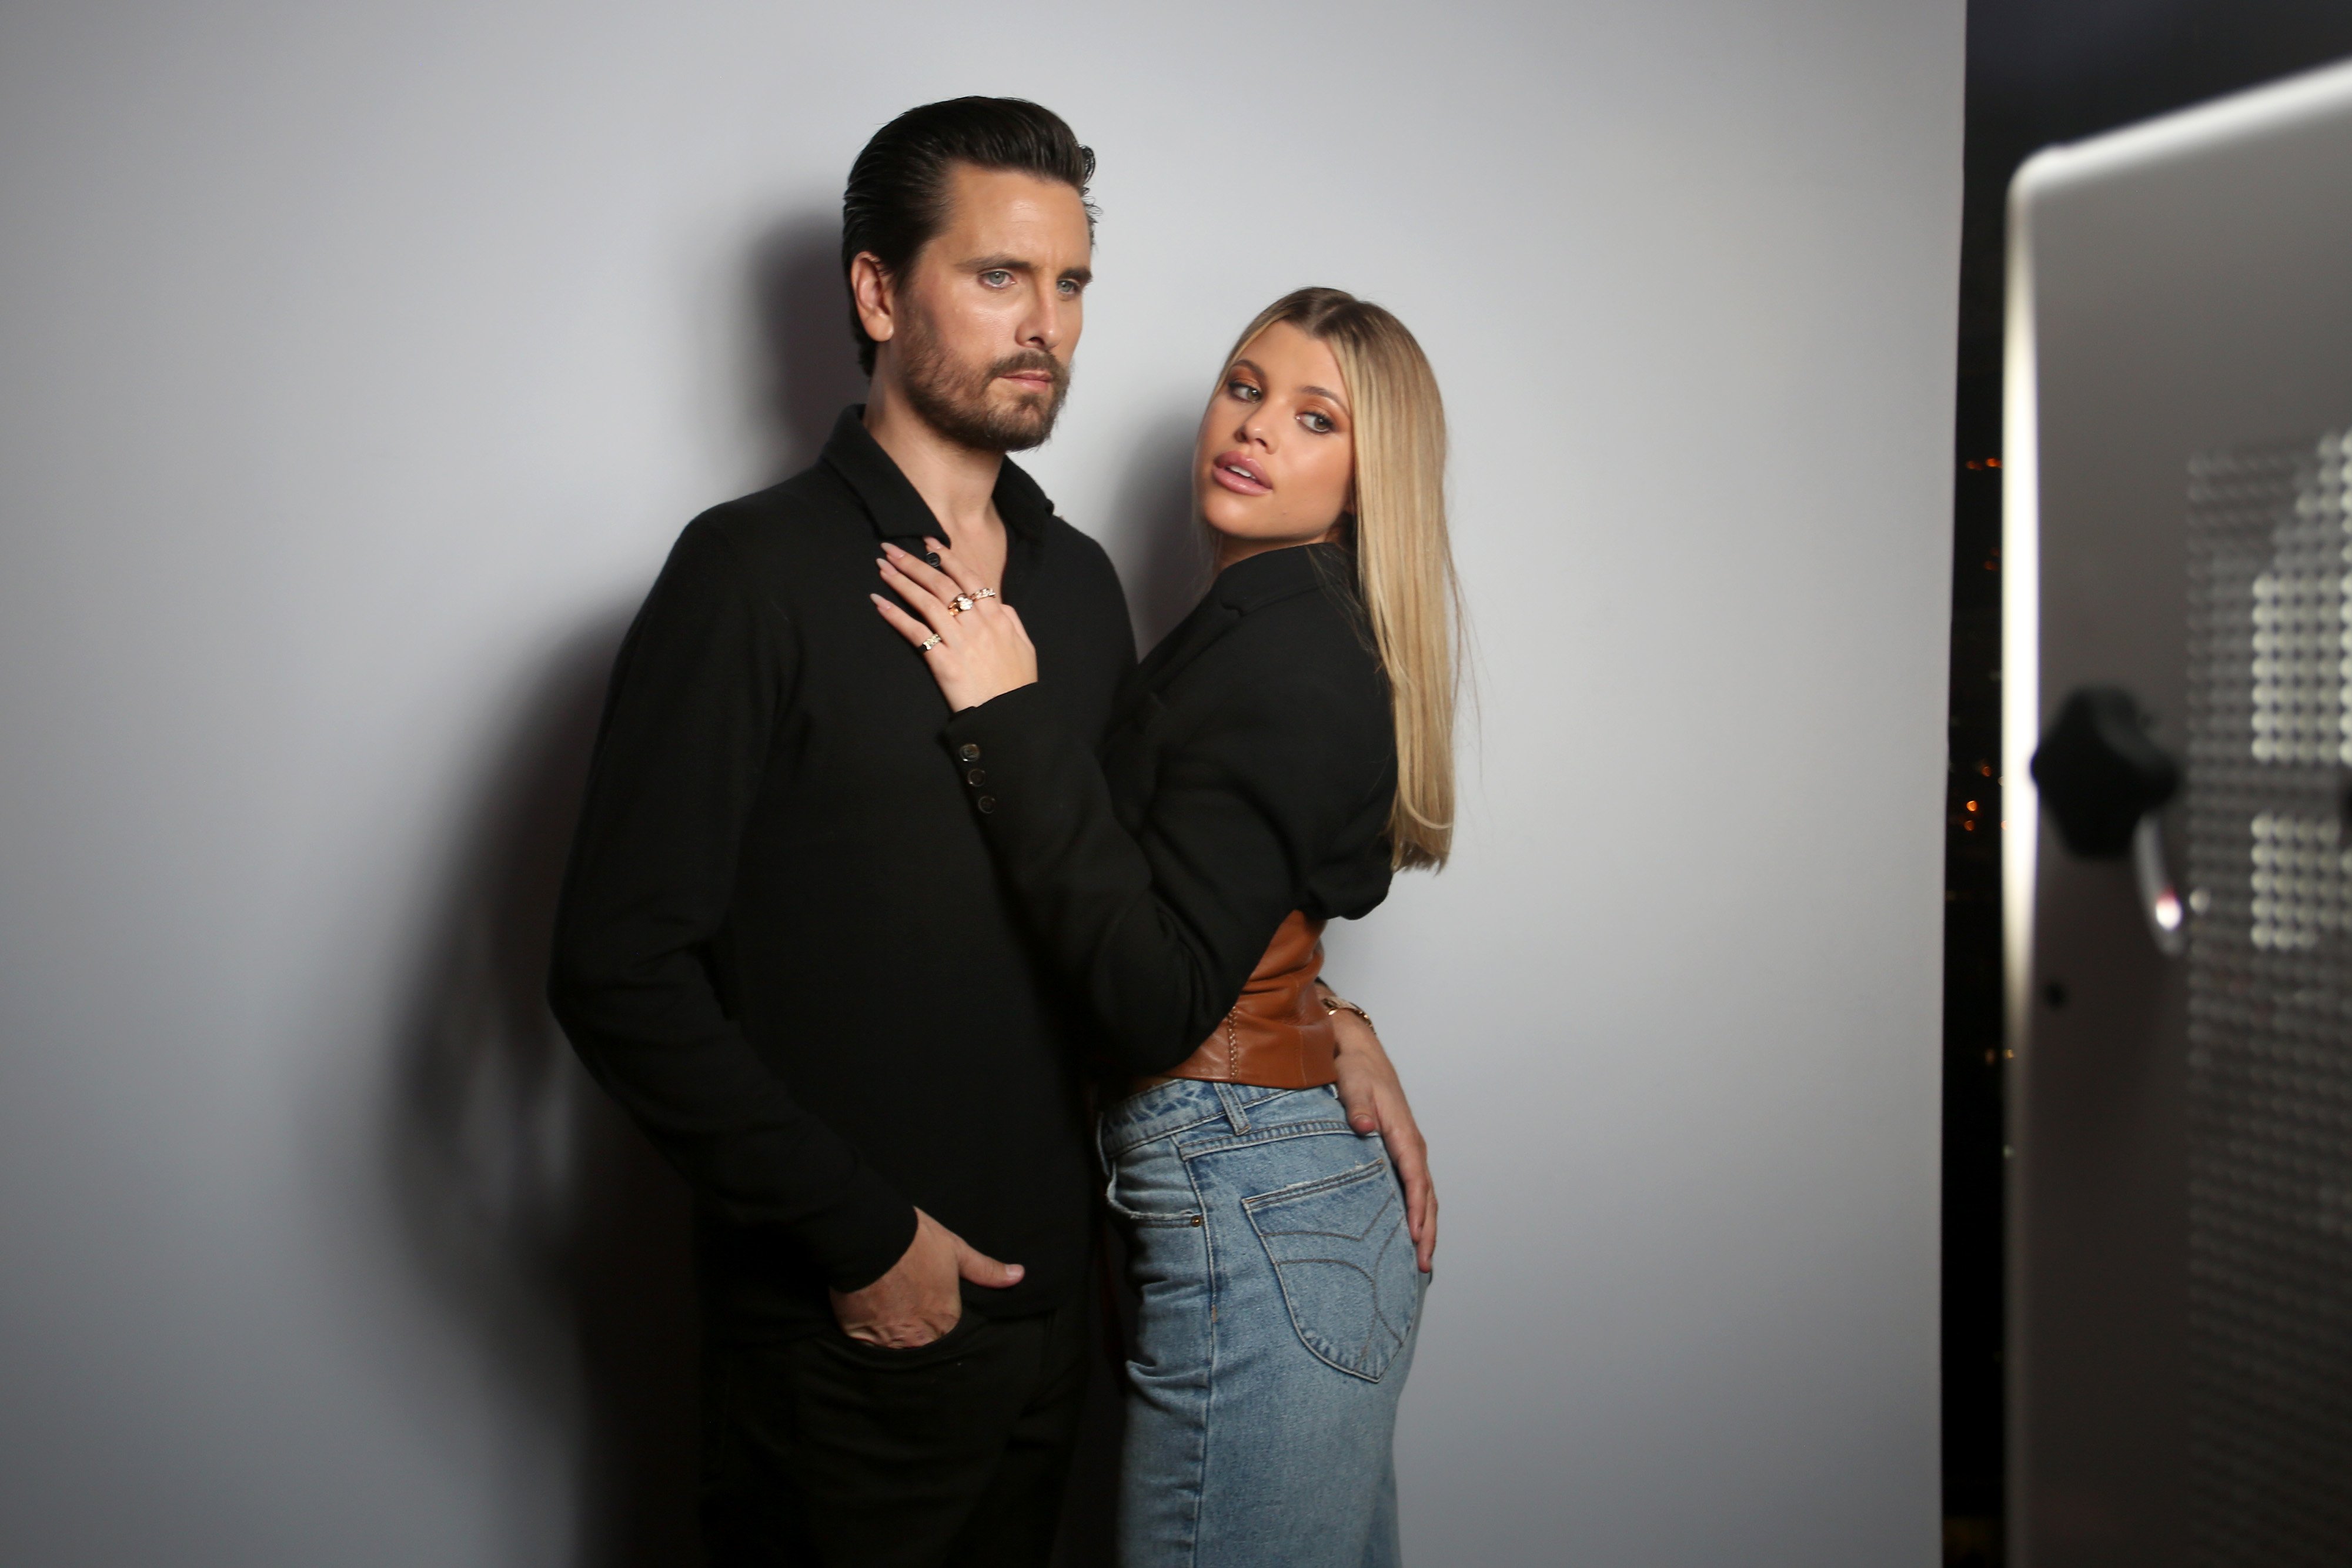 Scott Disick and Sofia Richie pose for a photo together in February 2020